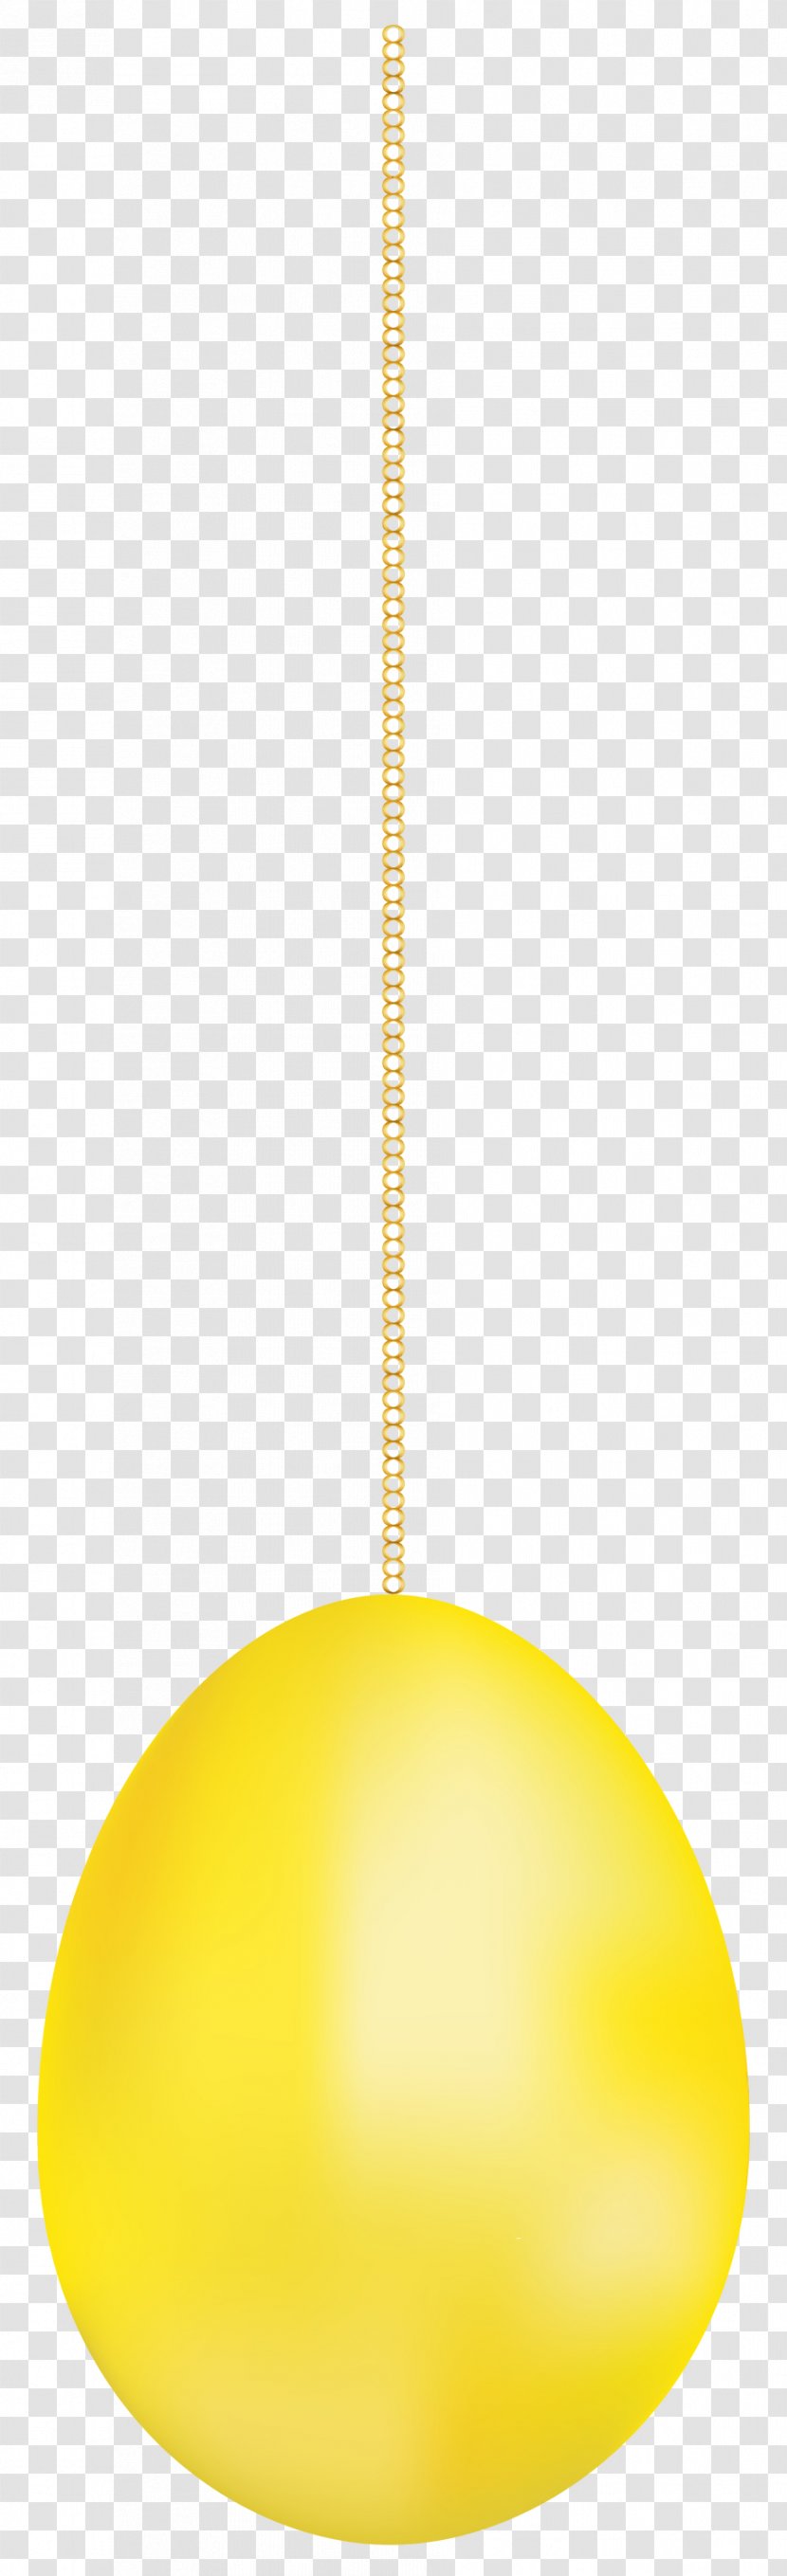 Yellow Line Light Fixture Sphere Ceiling - Lamp Transparent PNG